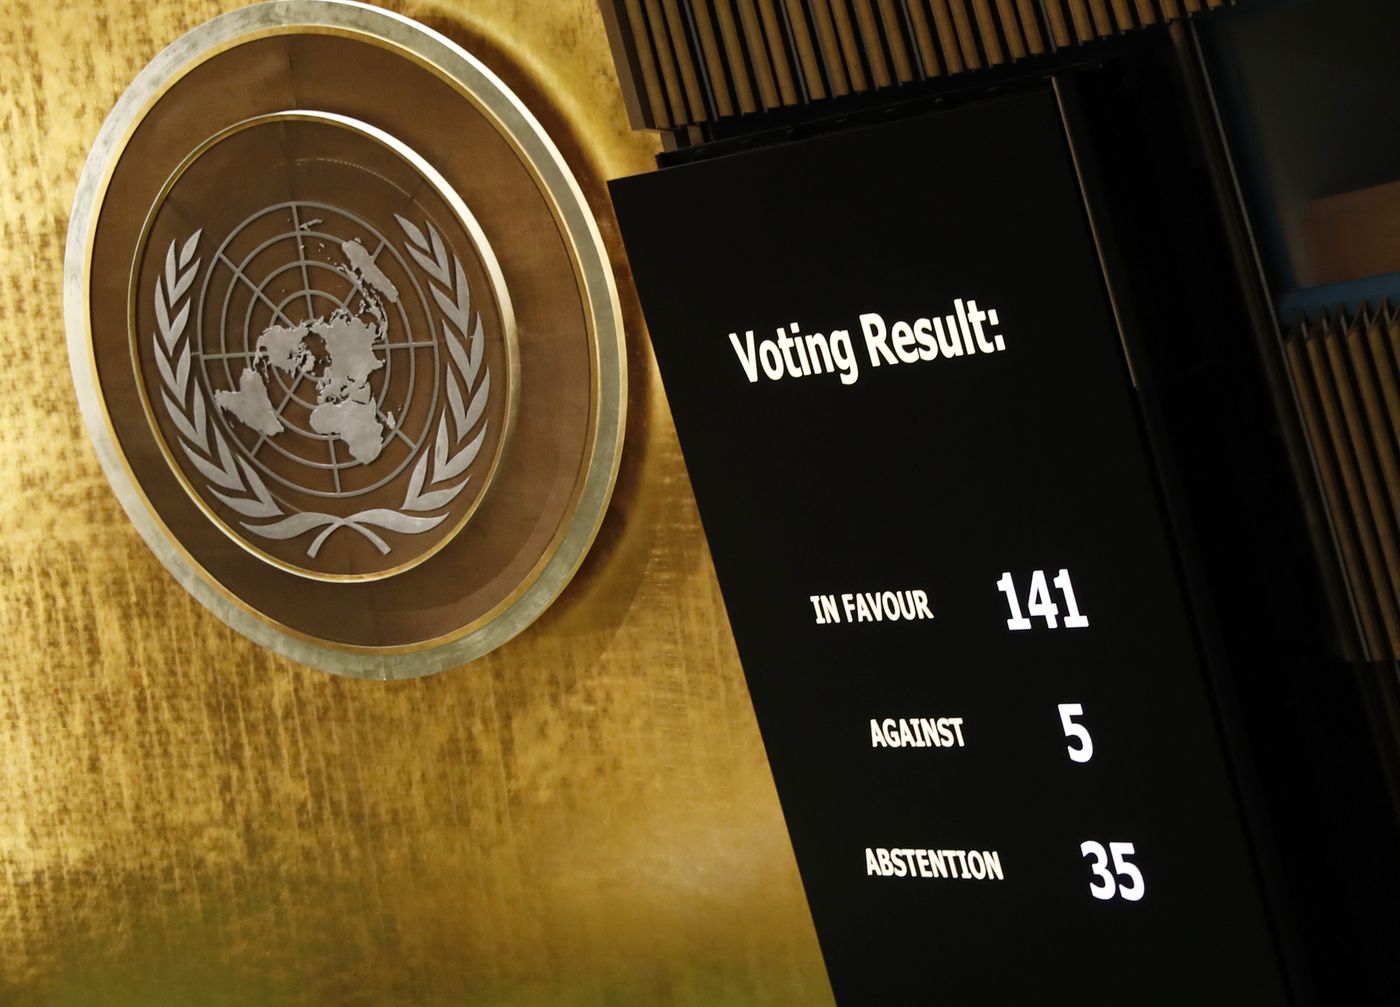 The results of the vote on a resolution condemning Russia for the violence in Ukraine.